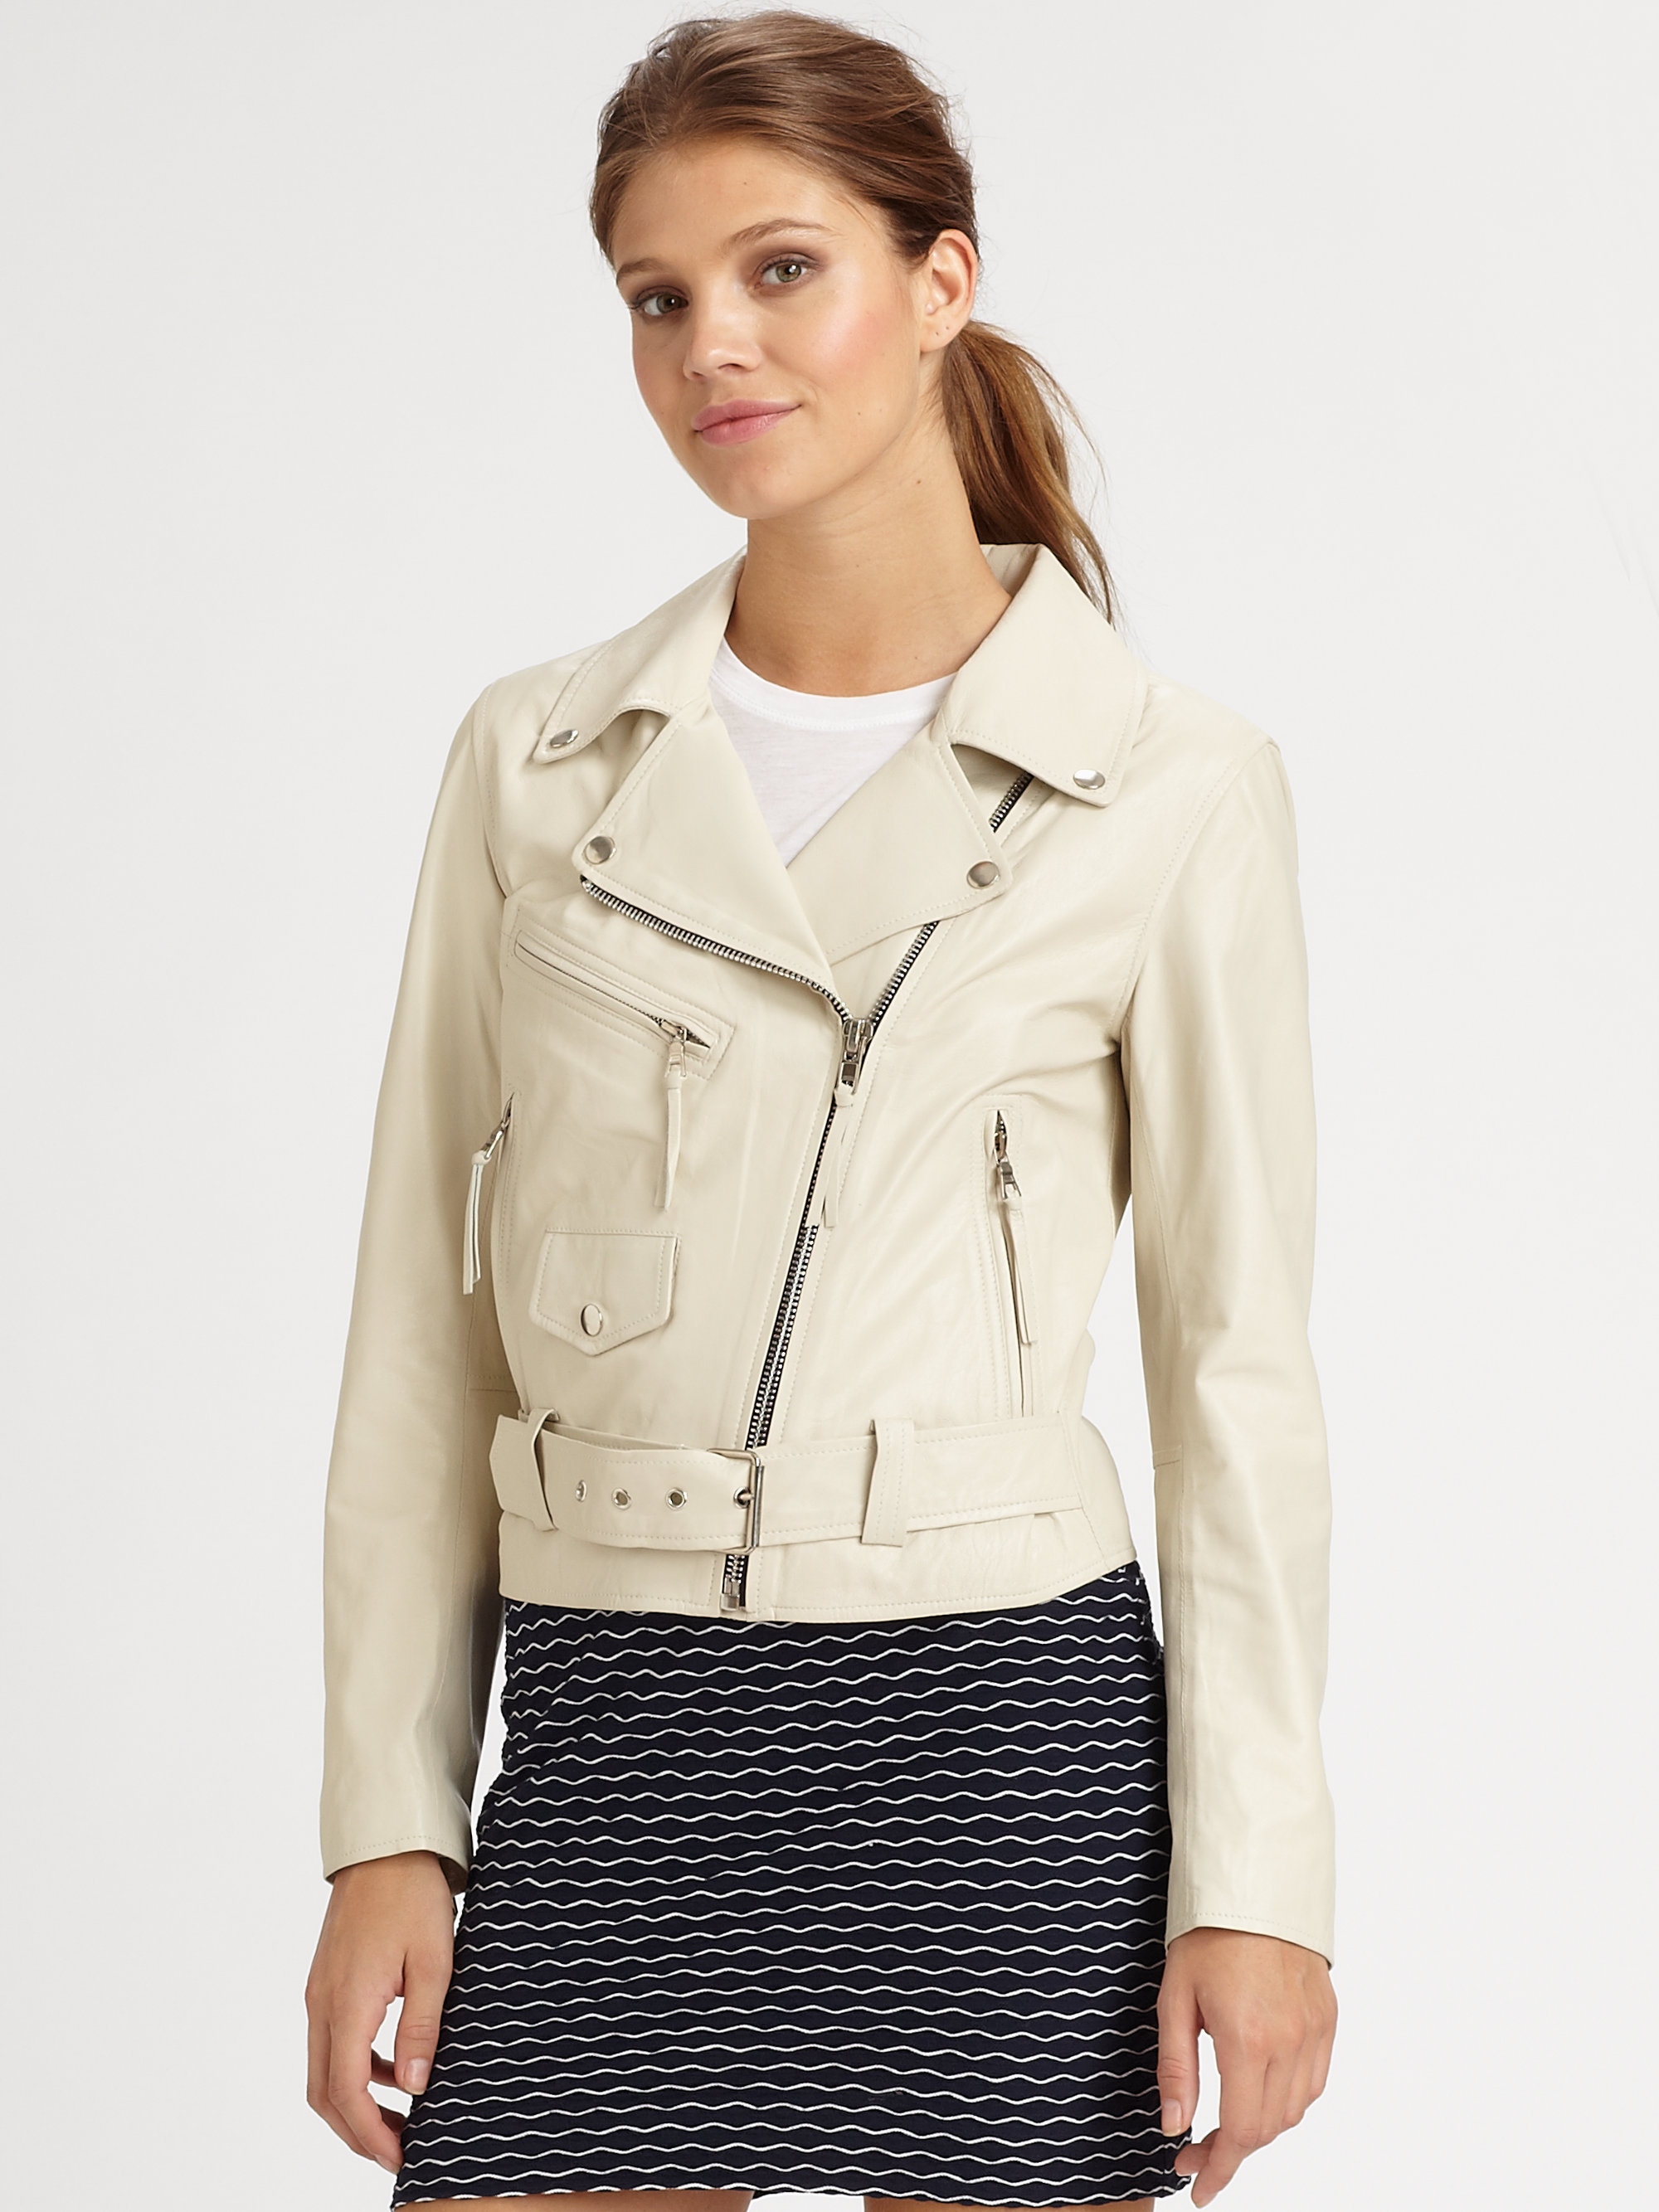 Milly Leather Motorcycle Jacket in White Lyst